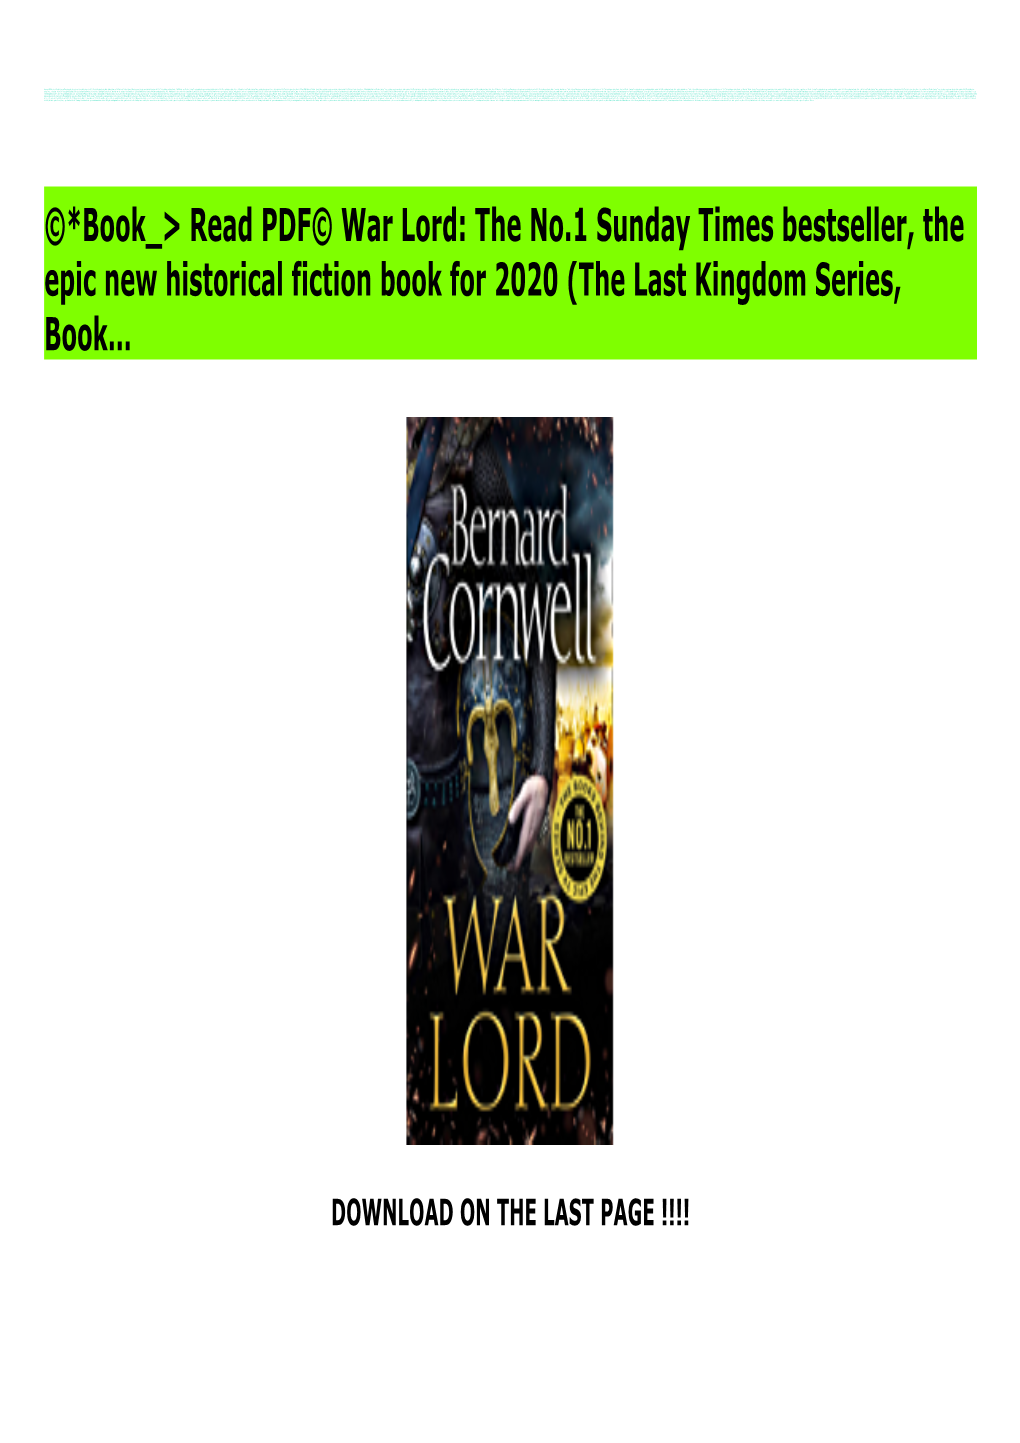 ©*Book &gt; Read PDF© War Lord: the No.1 Sunday Times Bestseller, the Epic New Historical Fiction Book for 2020 (The Last King